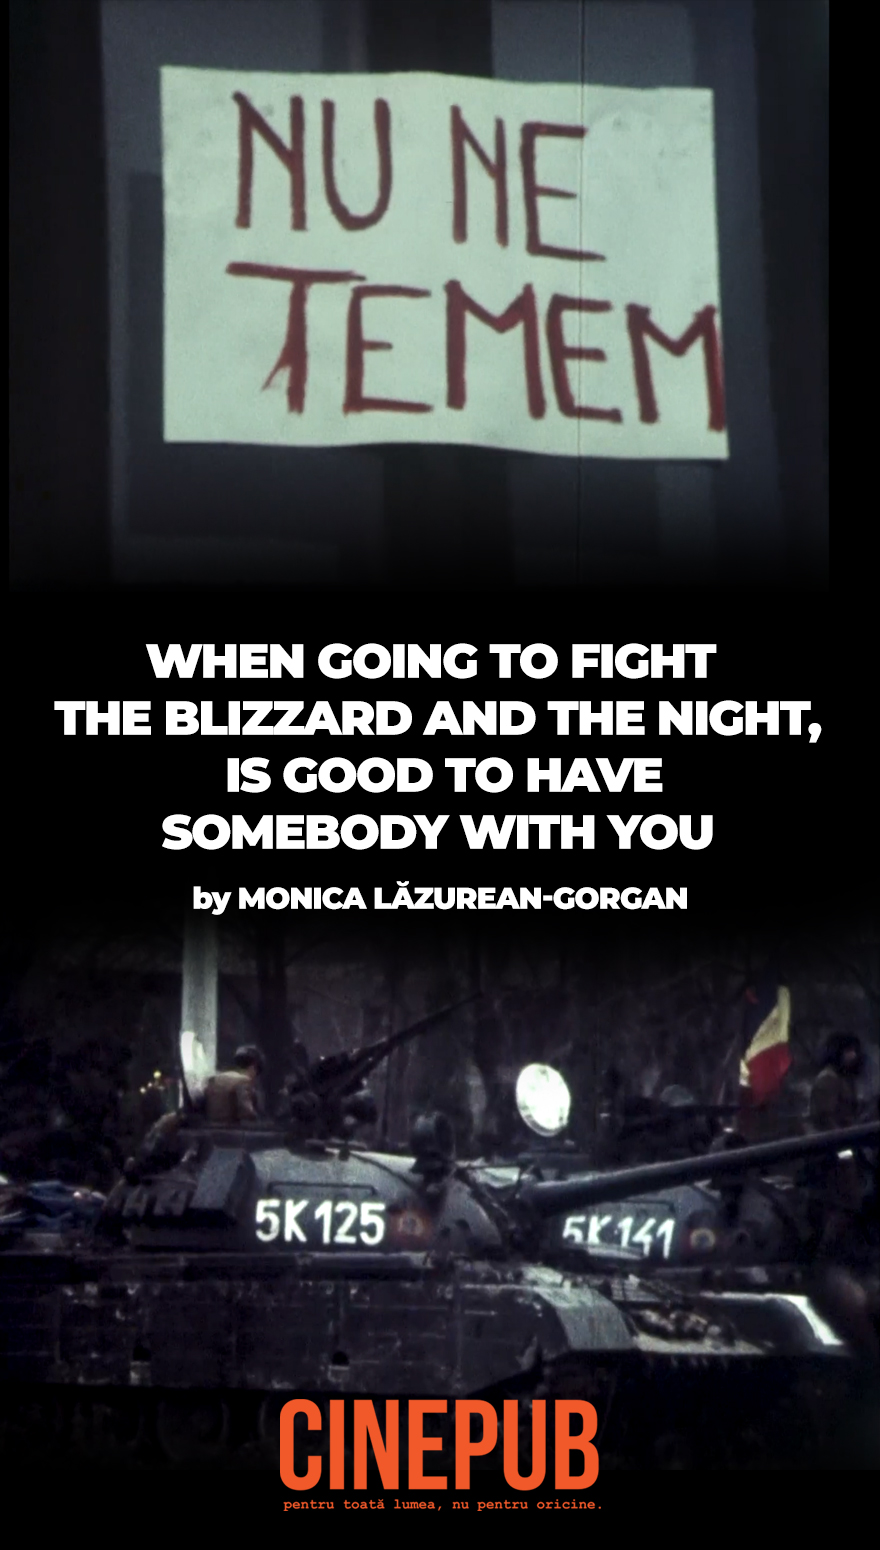 When Going to Fight the Blizzard and the Night - short film online on CINEPUB